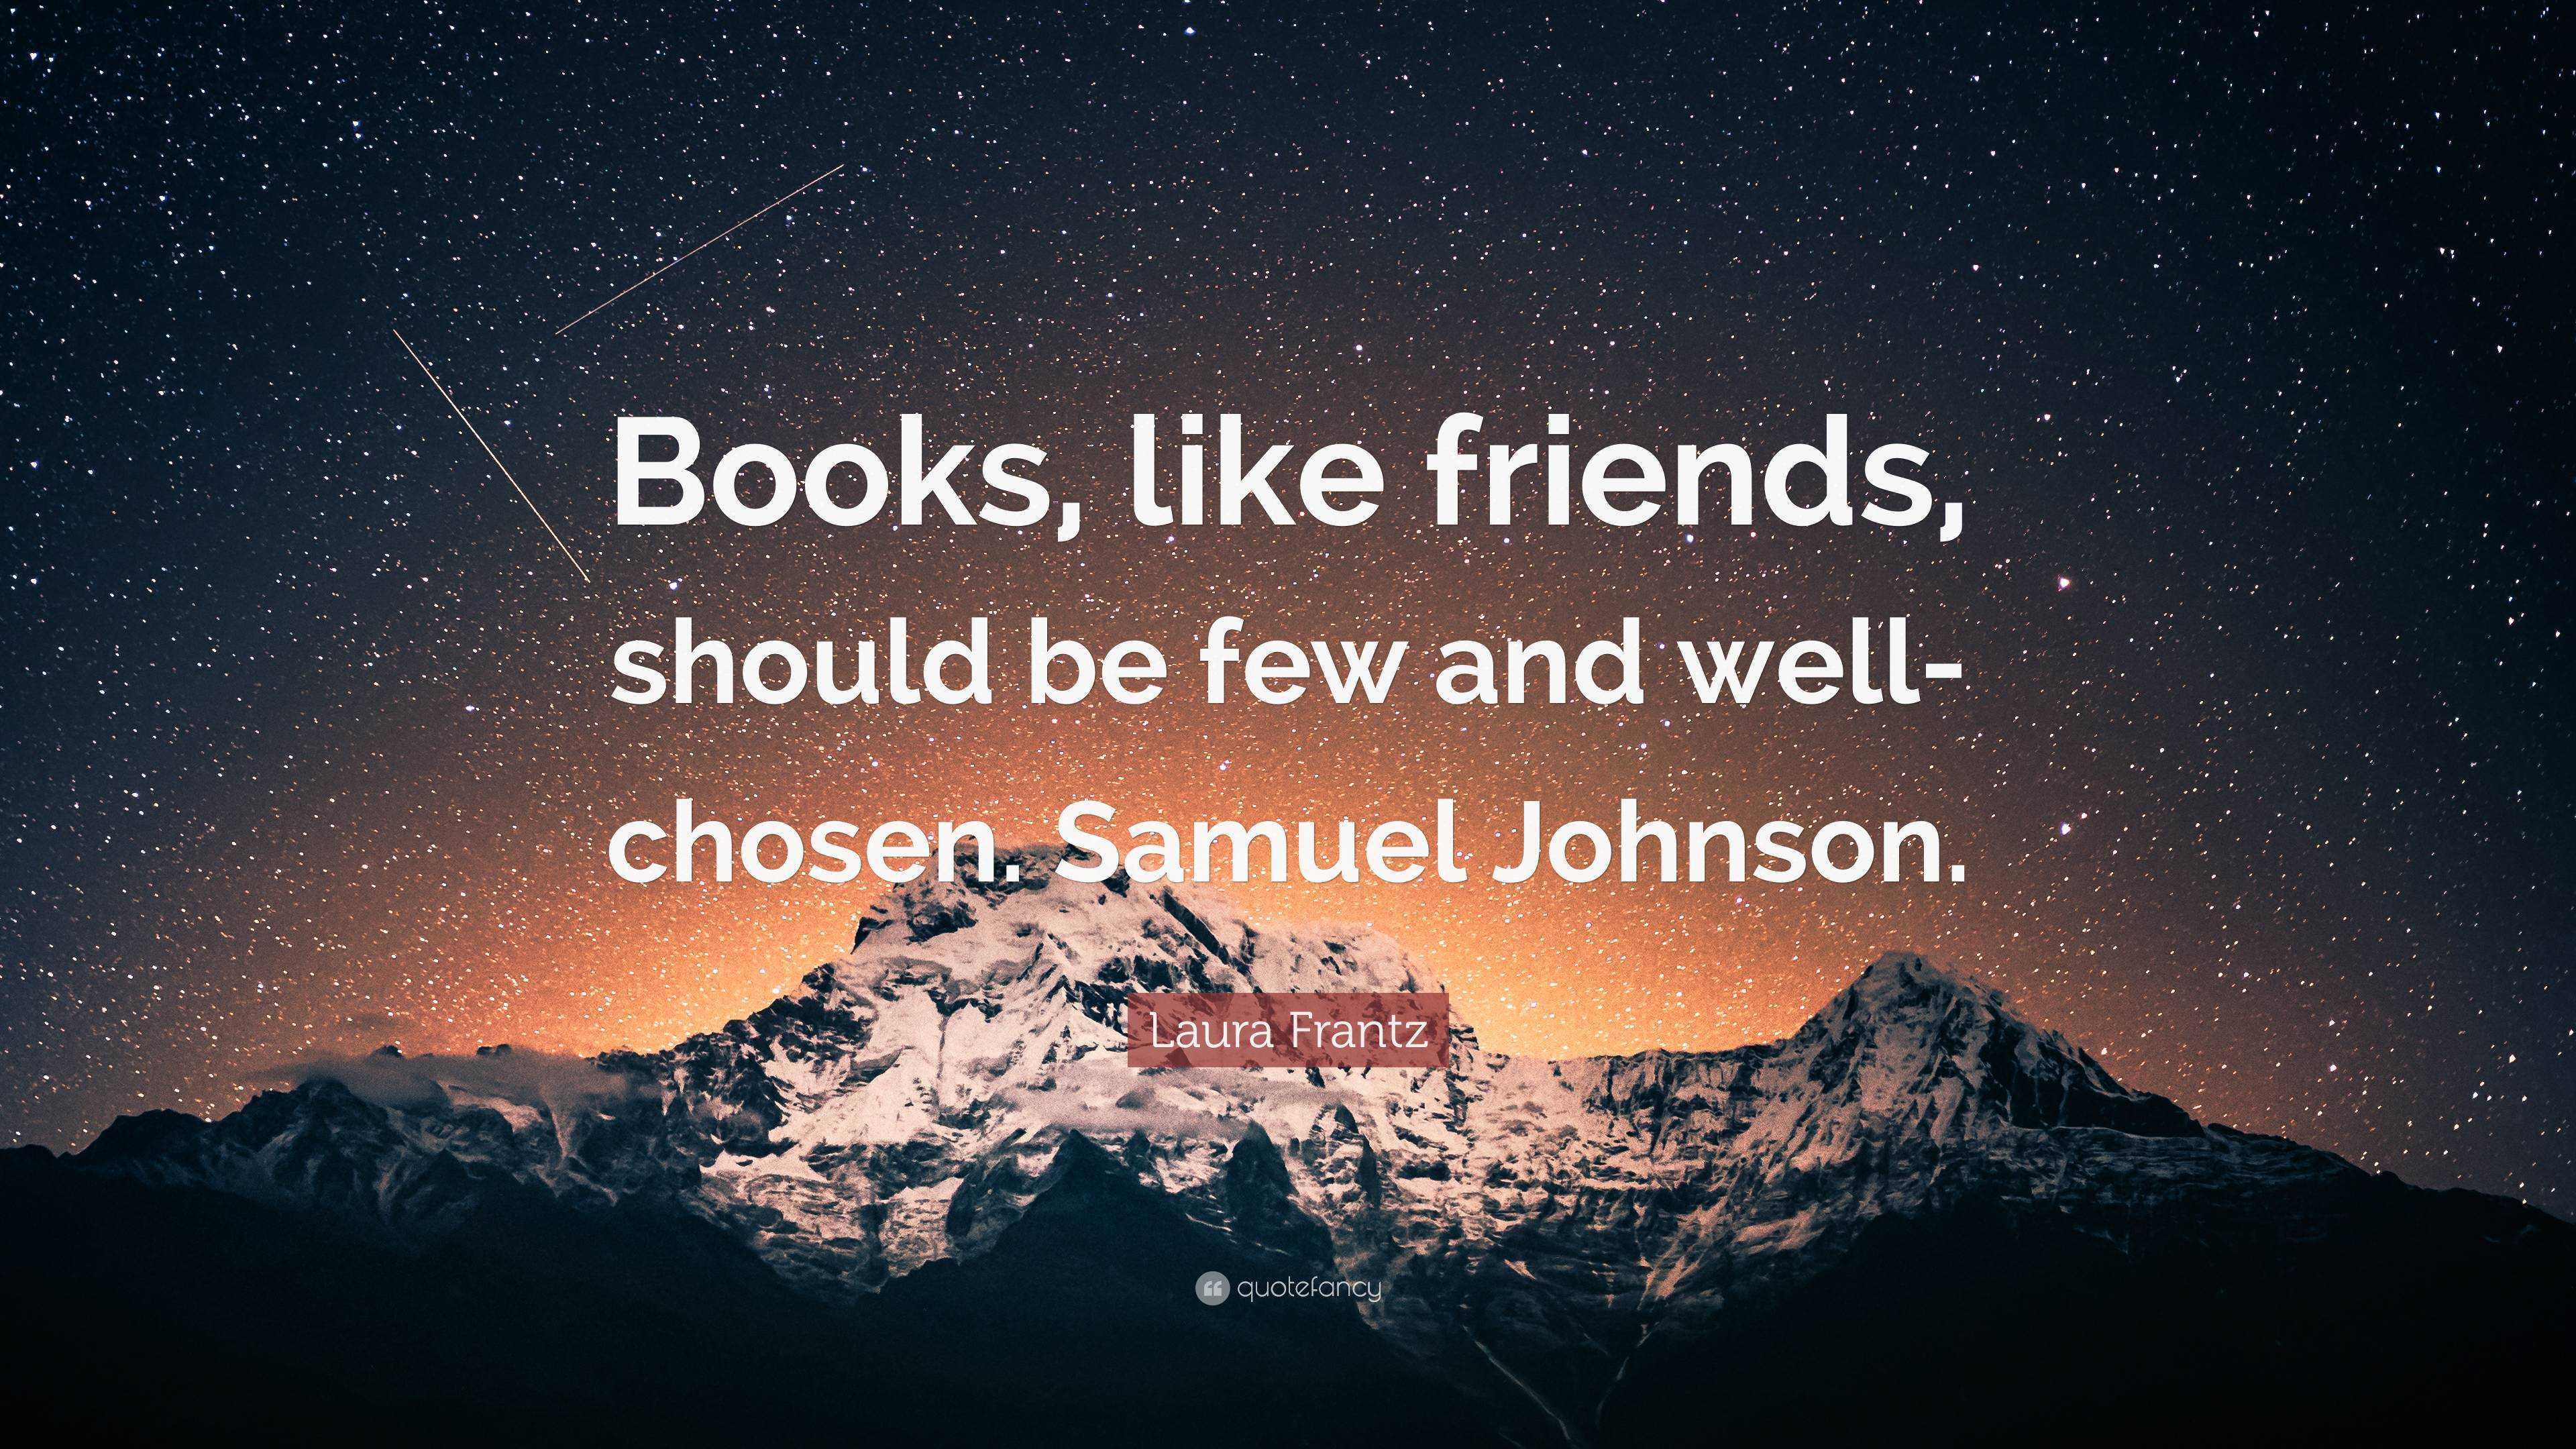 books and friends should be few and good essay